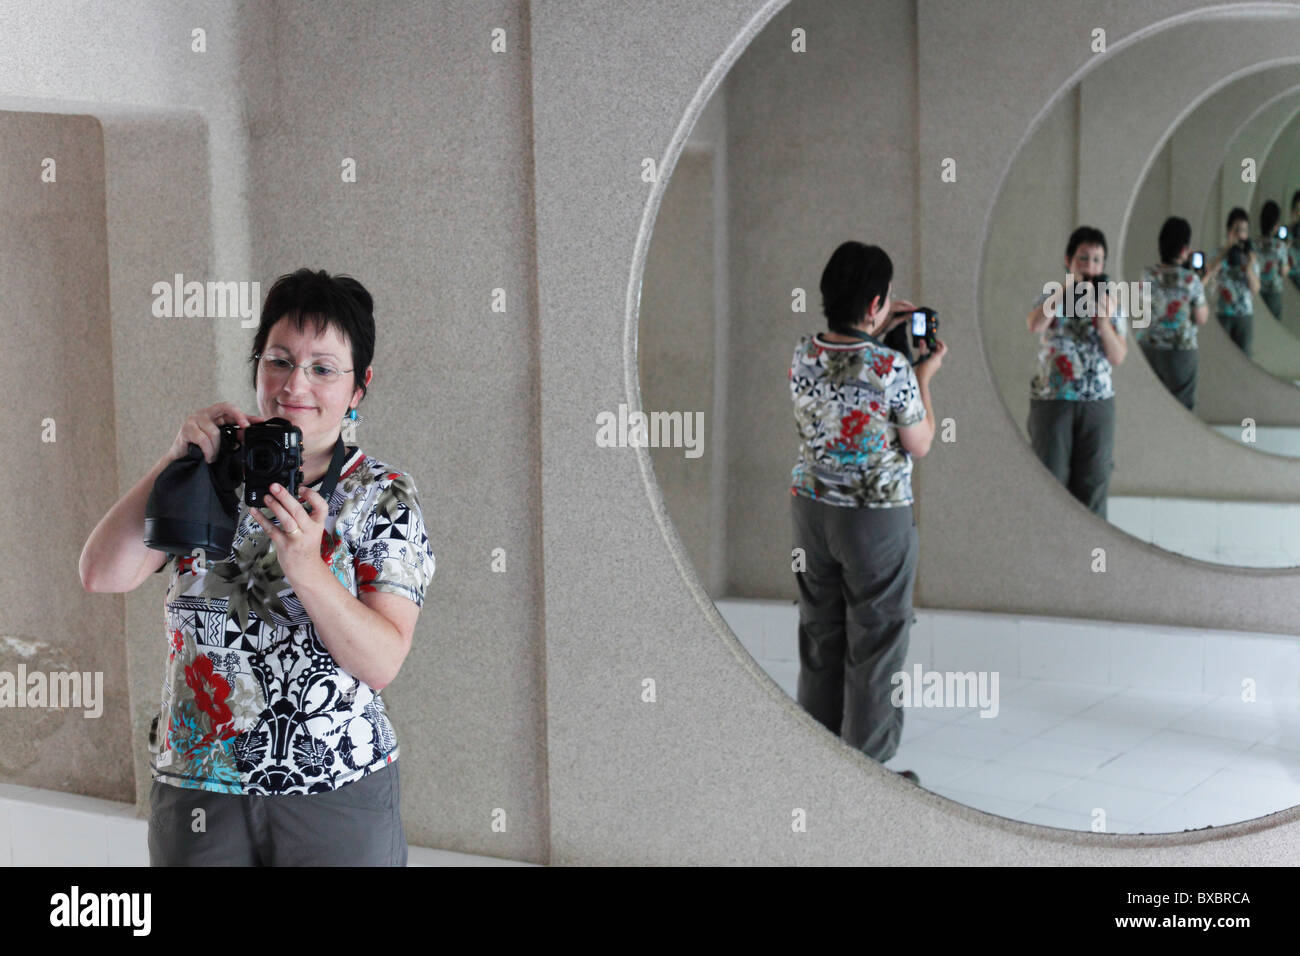 Woman with a camera in a hall of mirrors, Jameos del Agua, designed by César Manrique, Lanzarote, Canary Islands, Spain, Europe Stock Photo